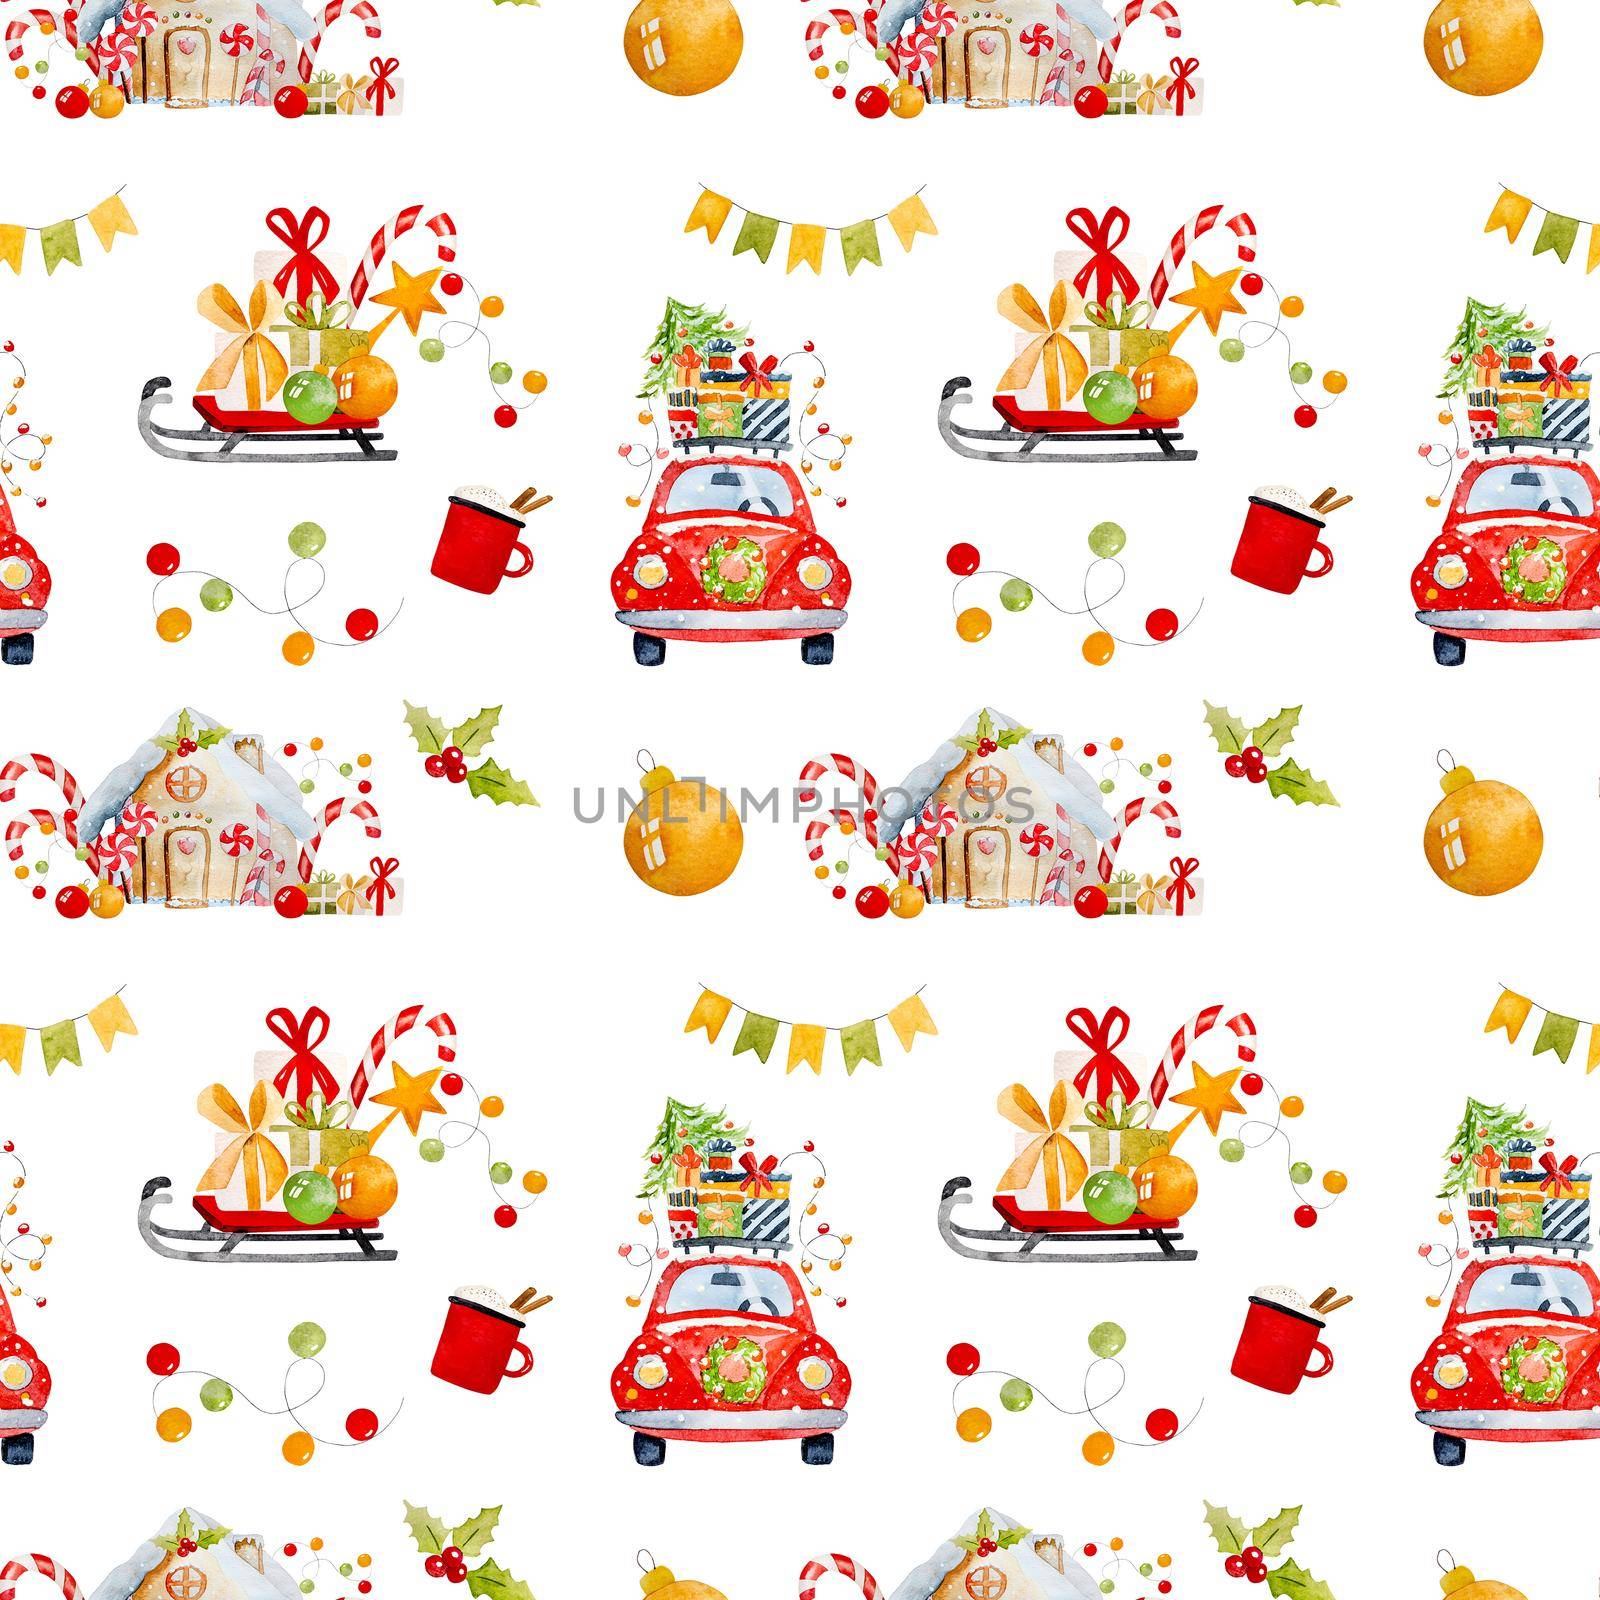 Christmas drawings watercolor seamless pattern with red car, xmas tree and sleg. New Year festive paintings with house, lollipop and gift